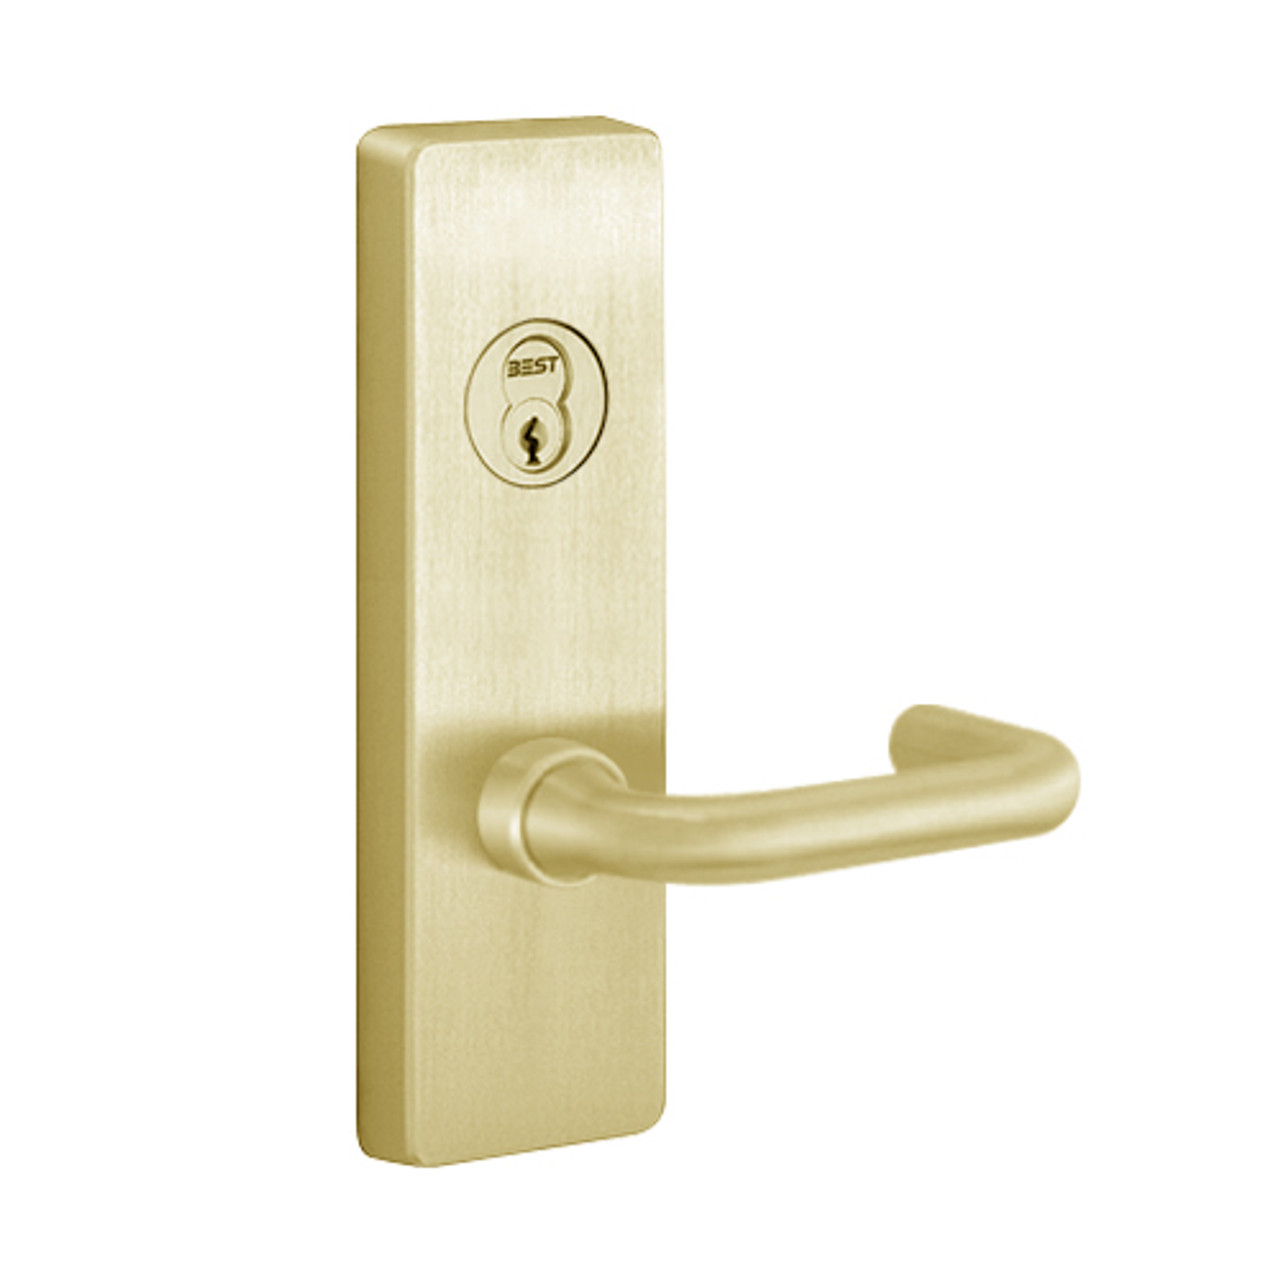 V4908C-605-LHR PHI Key Controls Lever Vandal Resistant Trim with C Lever Design for Apex and Olympian Series Exit Device in Bright Brass Finish